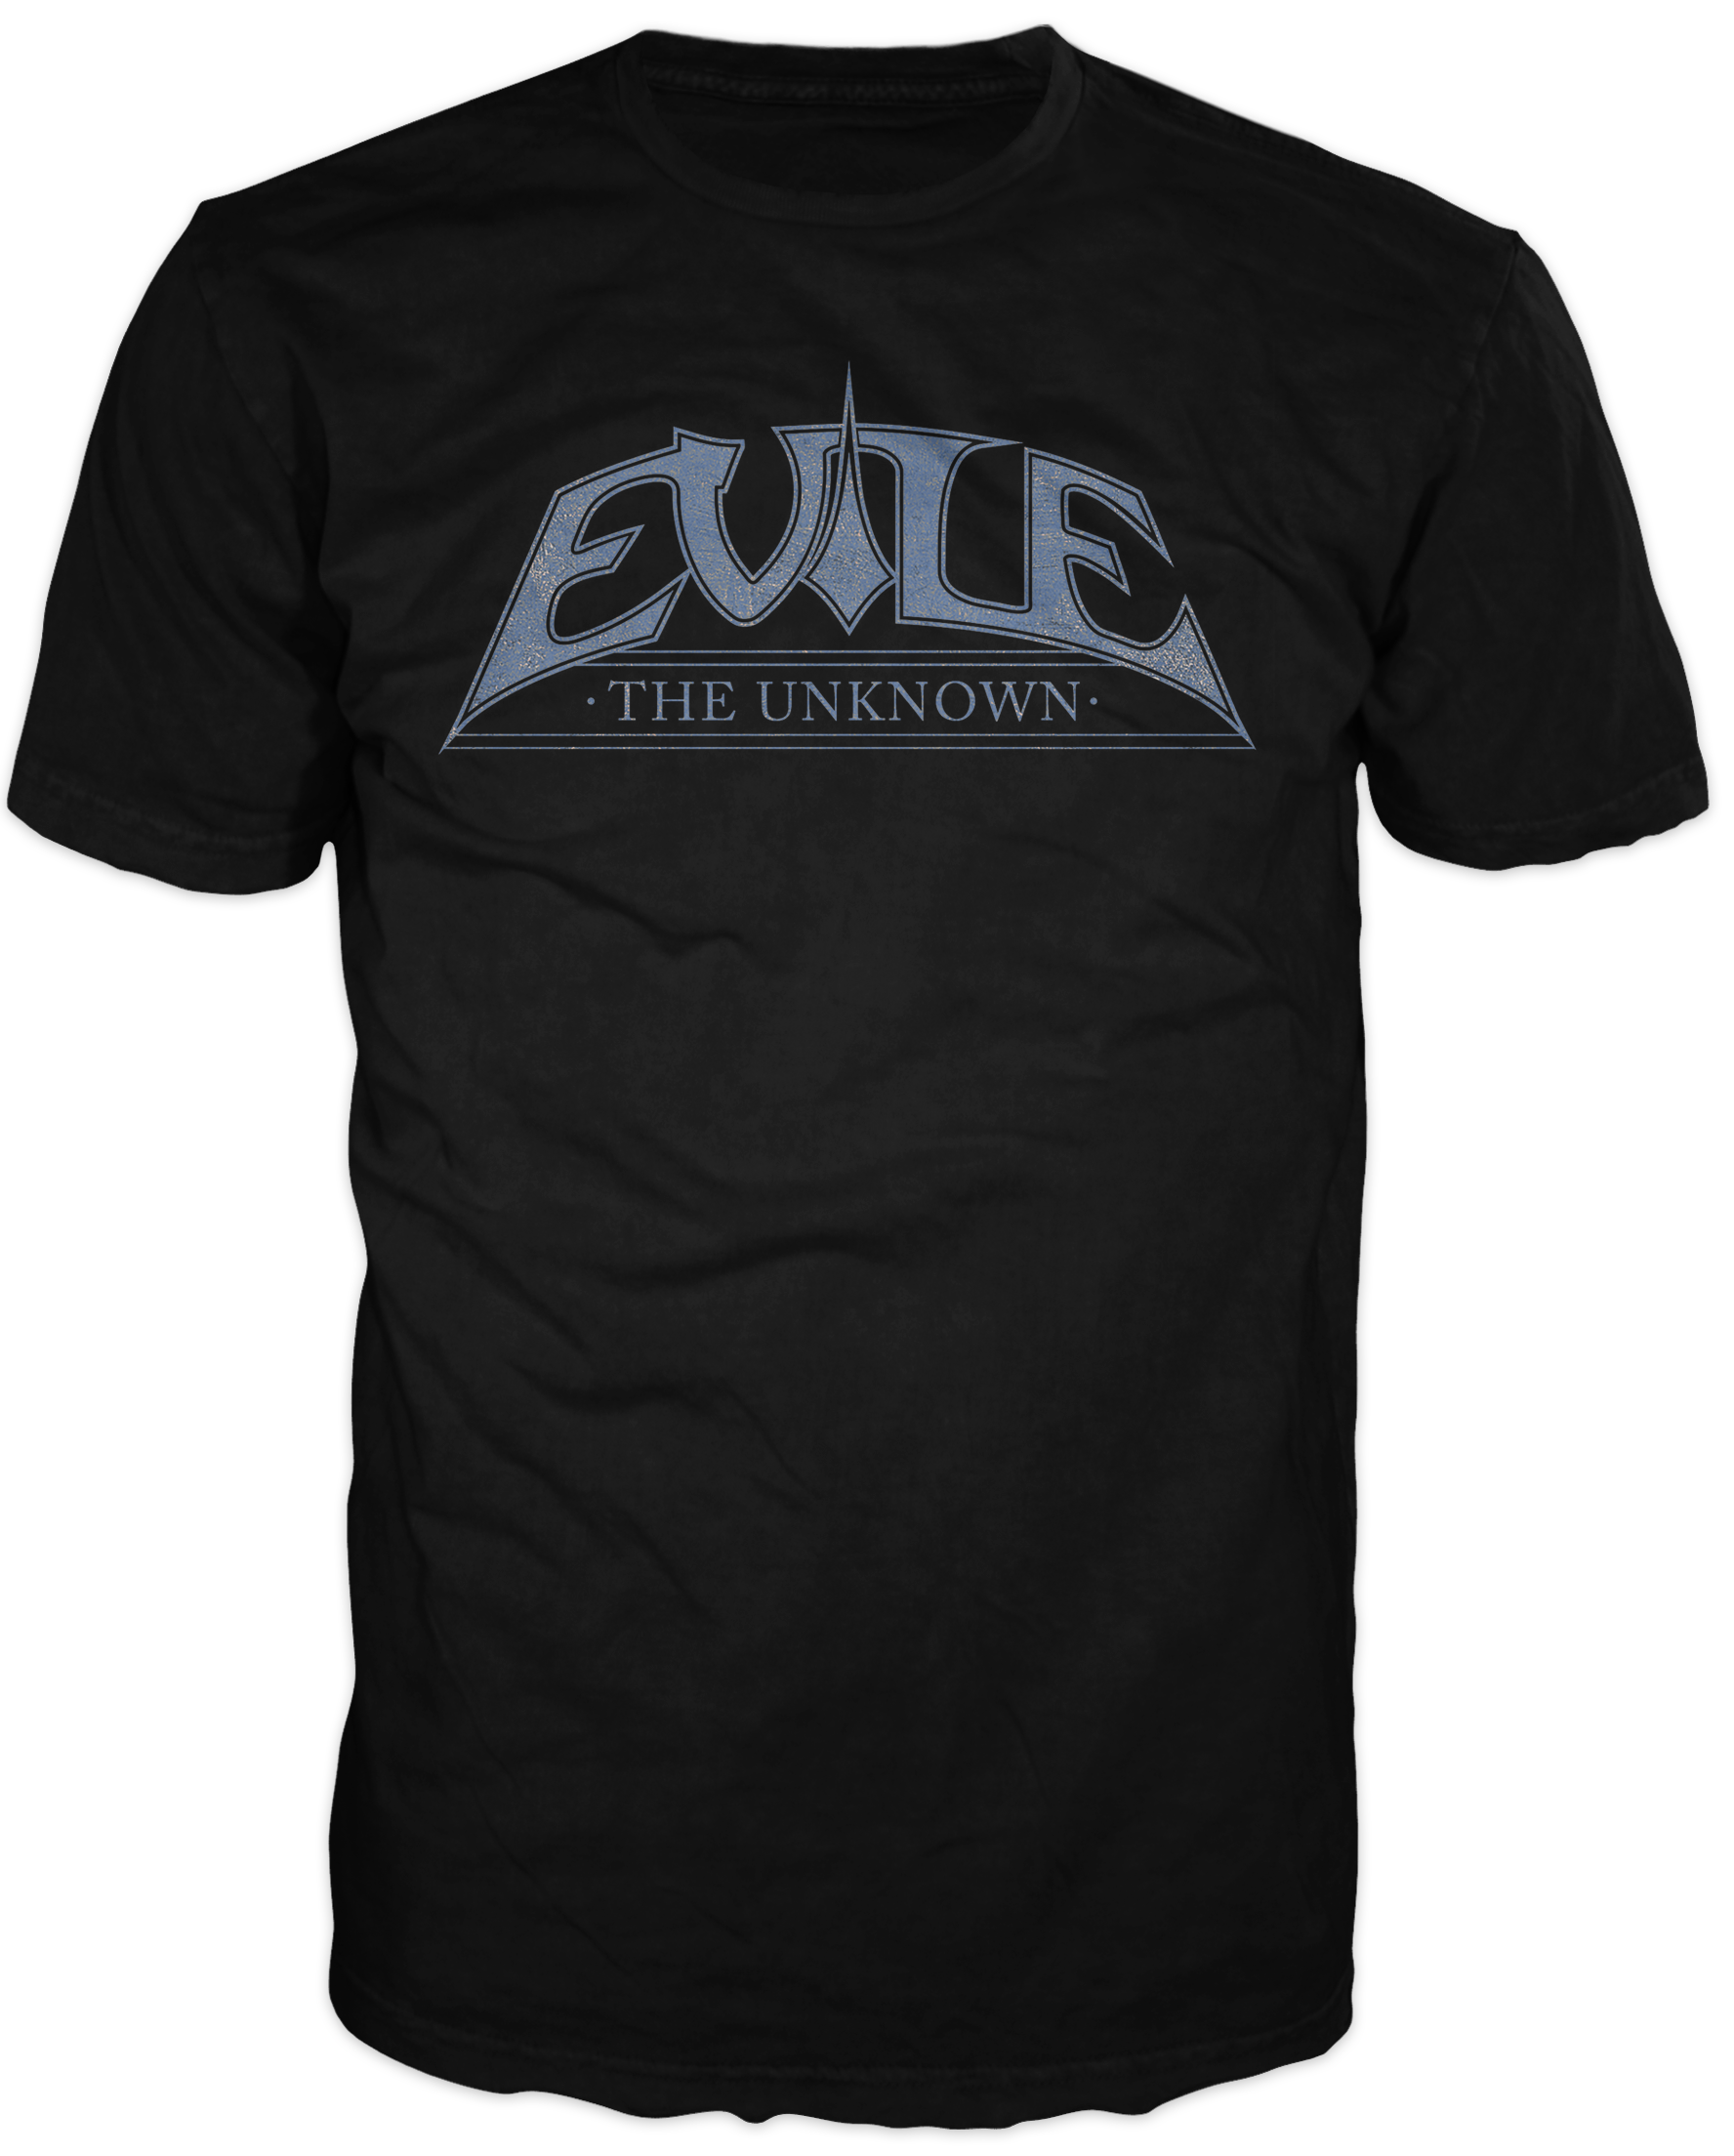 THE UNKNOWN T-SHIRT – EVILE